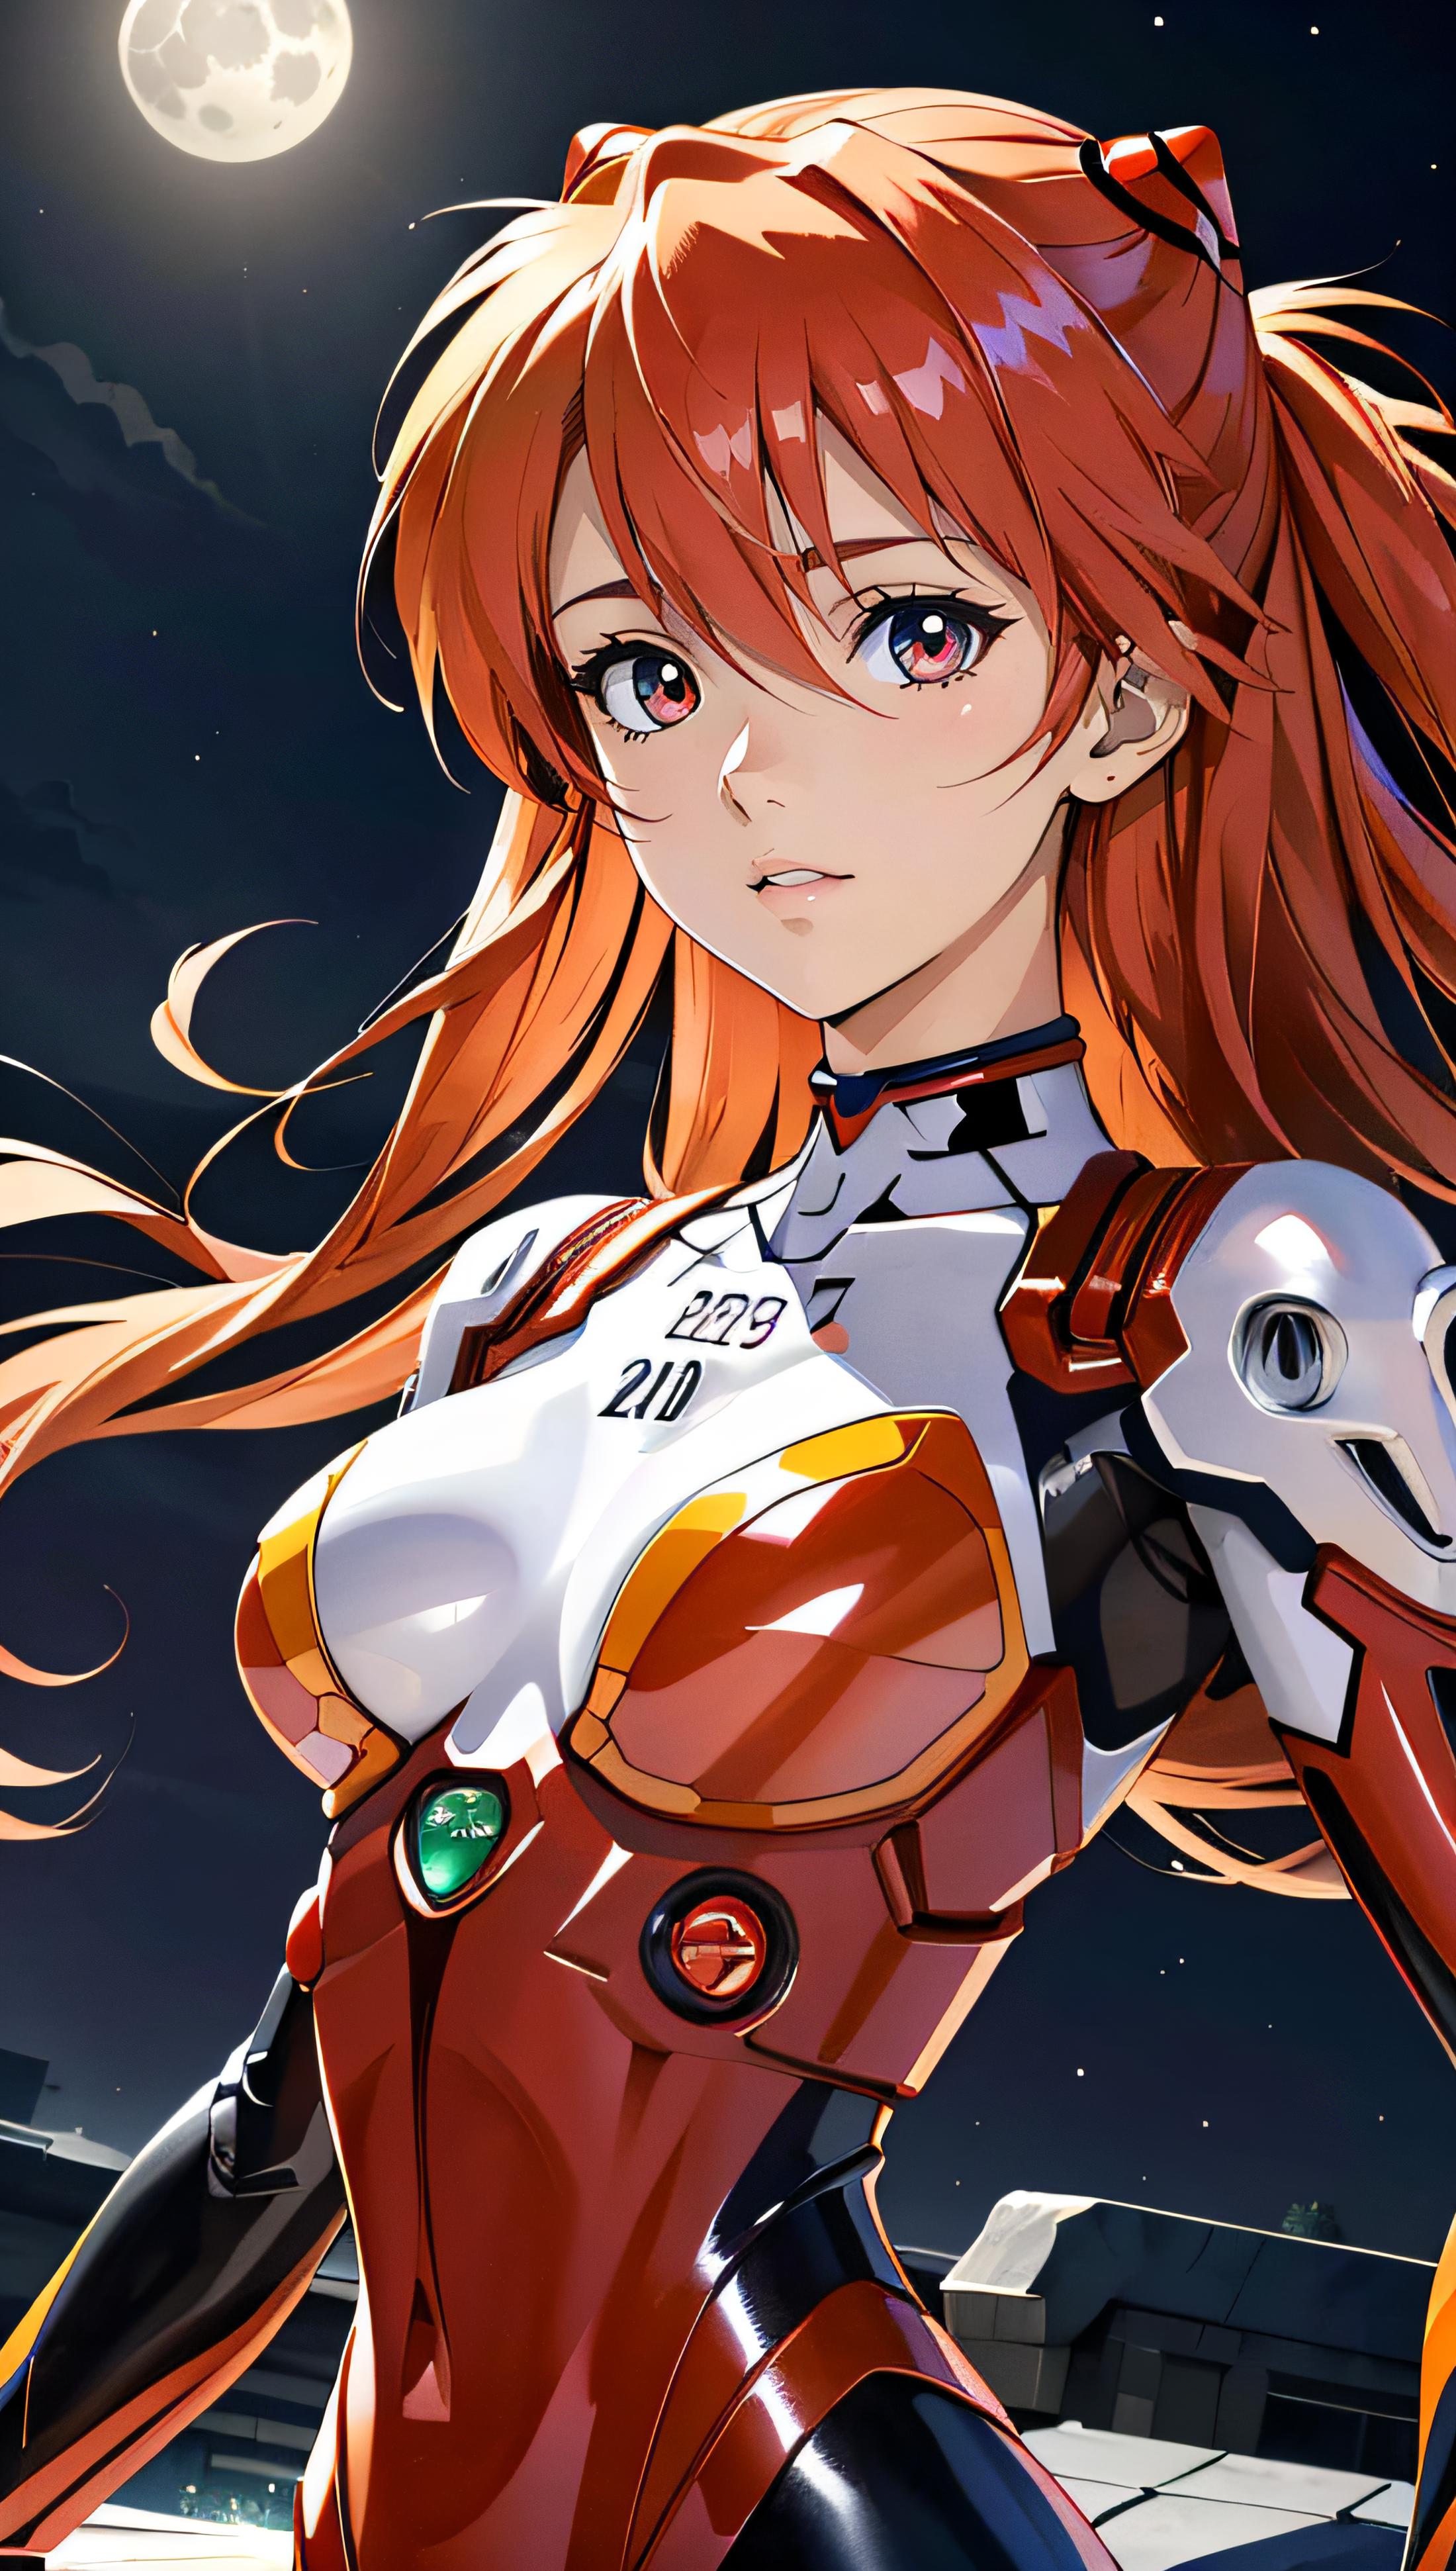 Anime character with red hair and a green button on her chest.